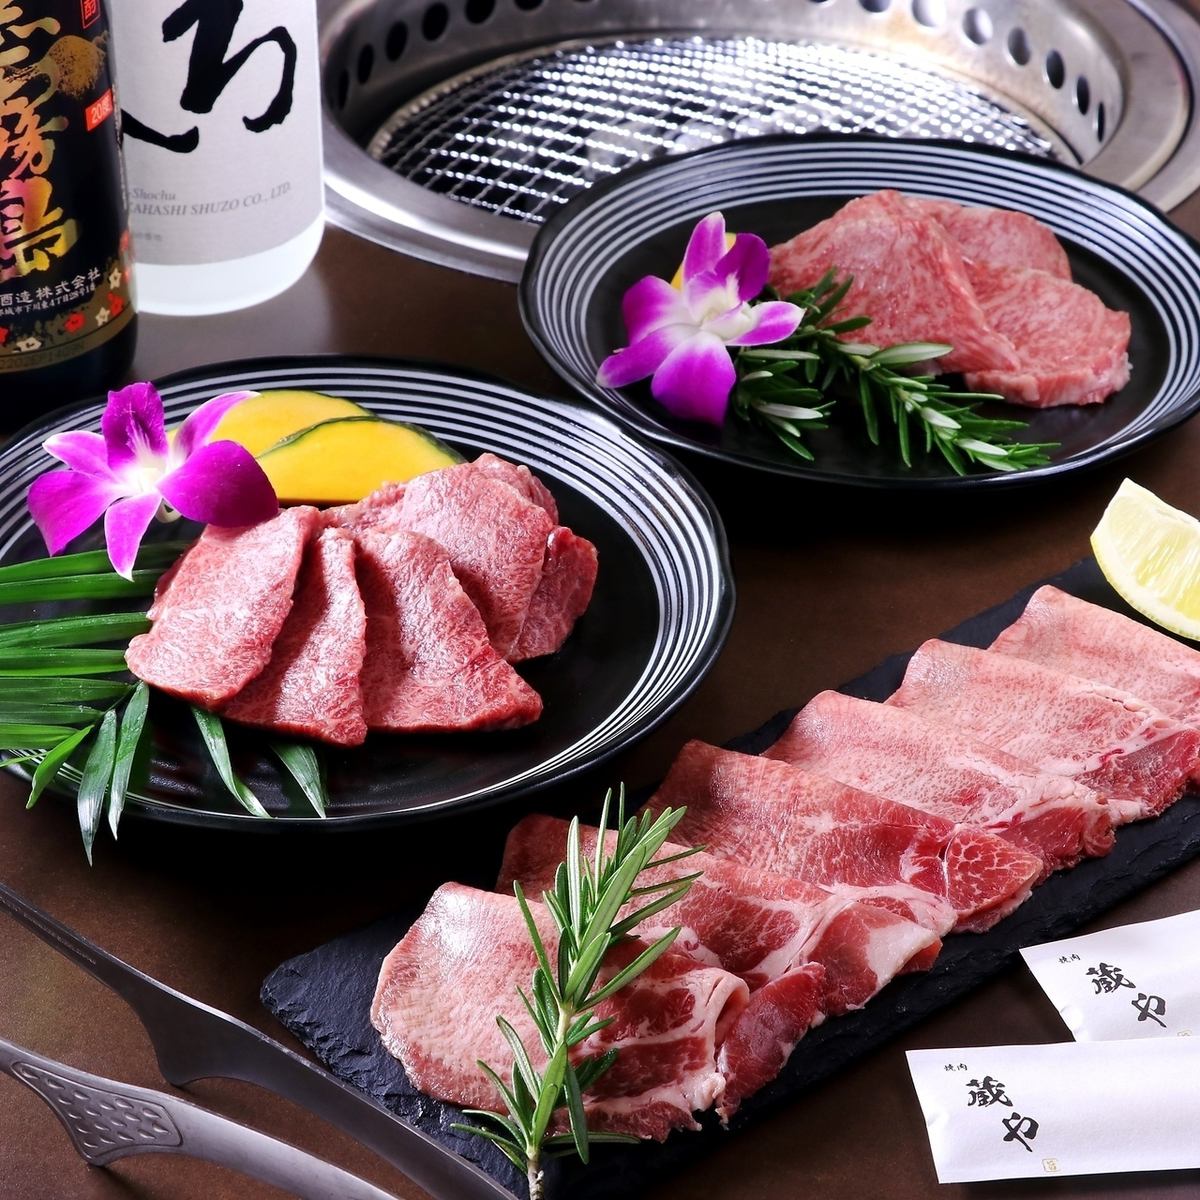 Domestic Wagyu beef at a reasonable price ♪ We offer a private space with all seats completely private